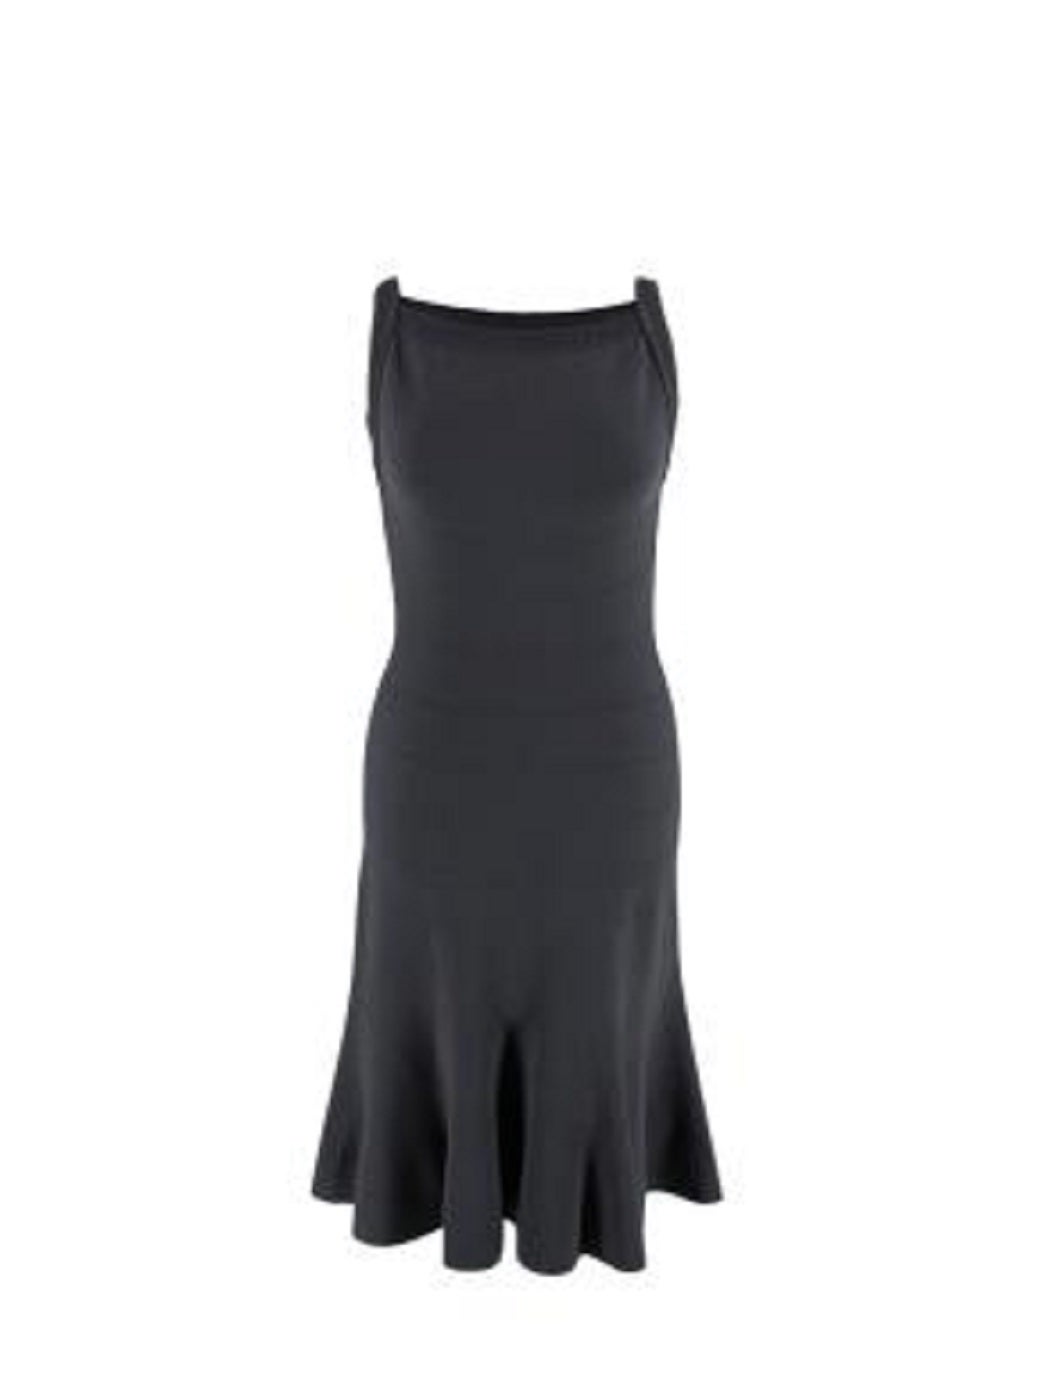 Alaia Grey Fit & Flare Stretch Knit Dress For Sale